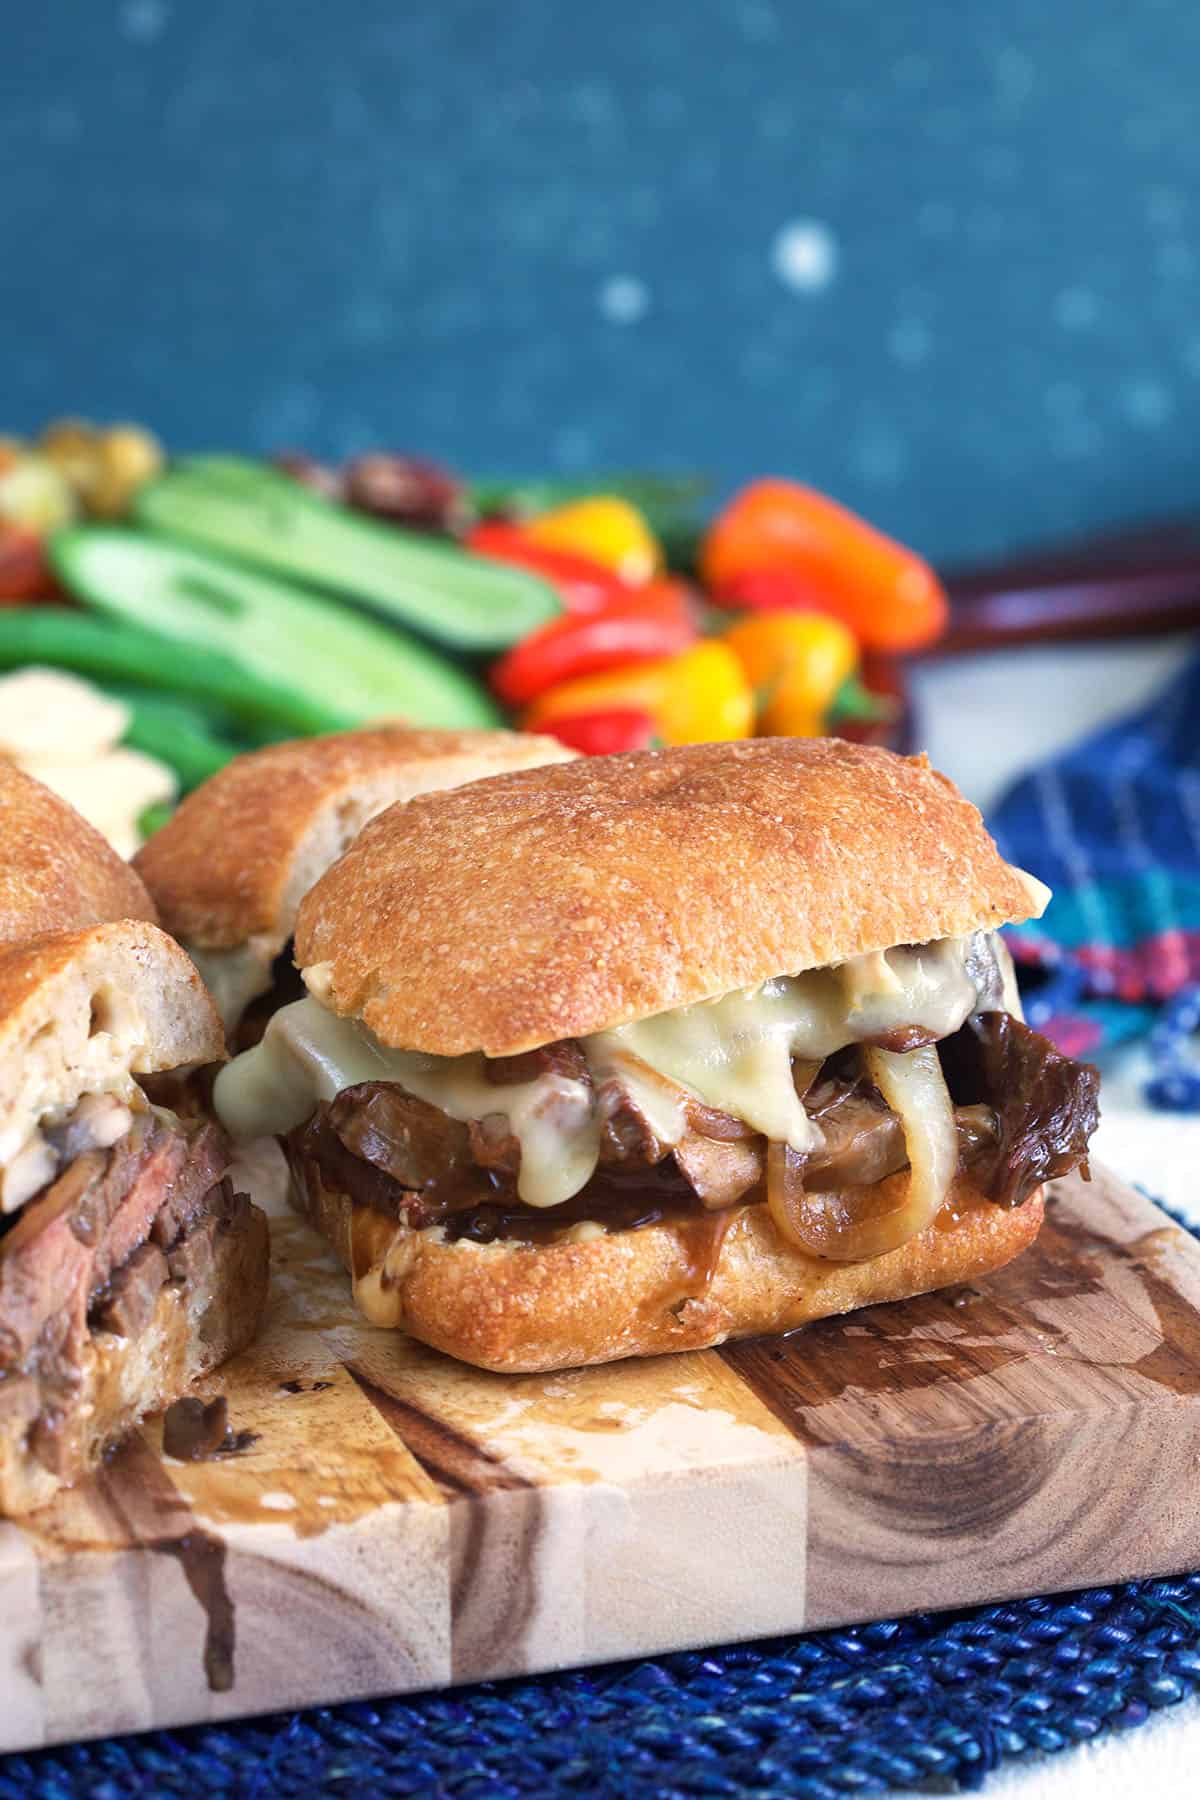 Several roast beef sandwiches are presented on a wooden cutting board next to some fresh vegetables.